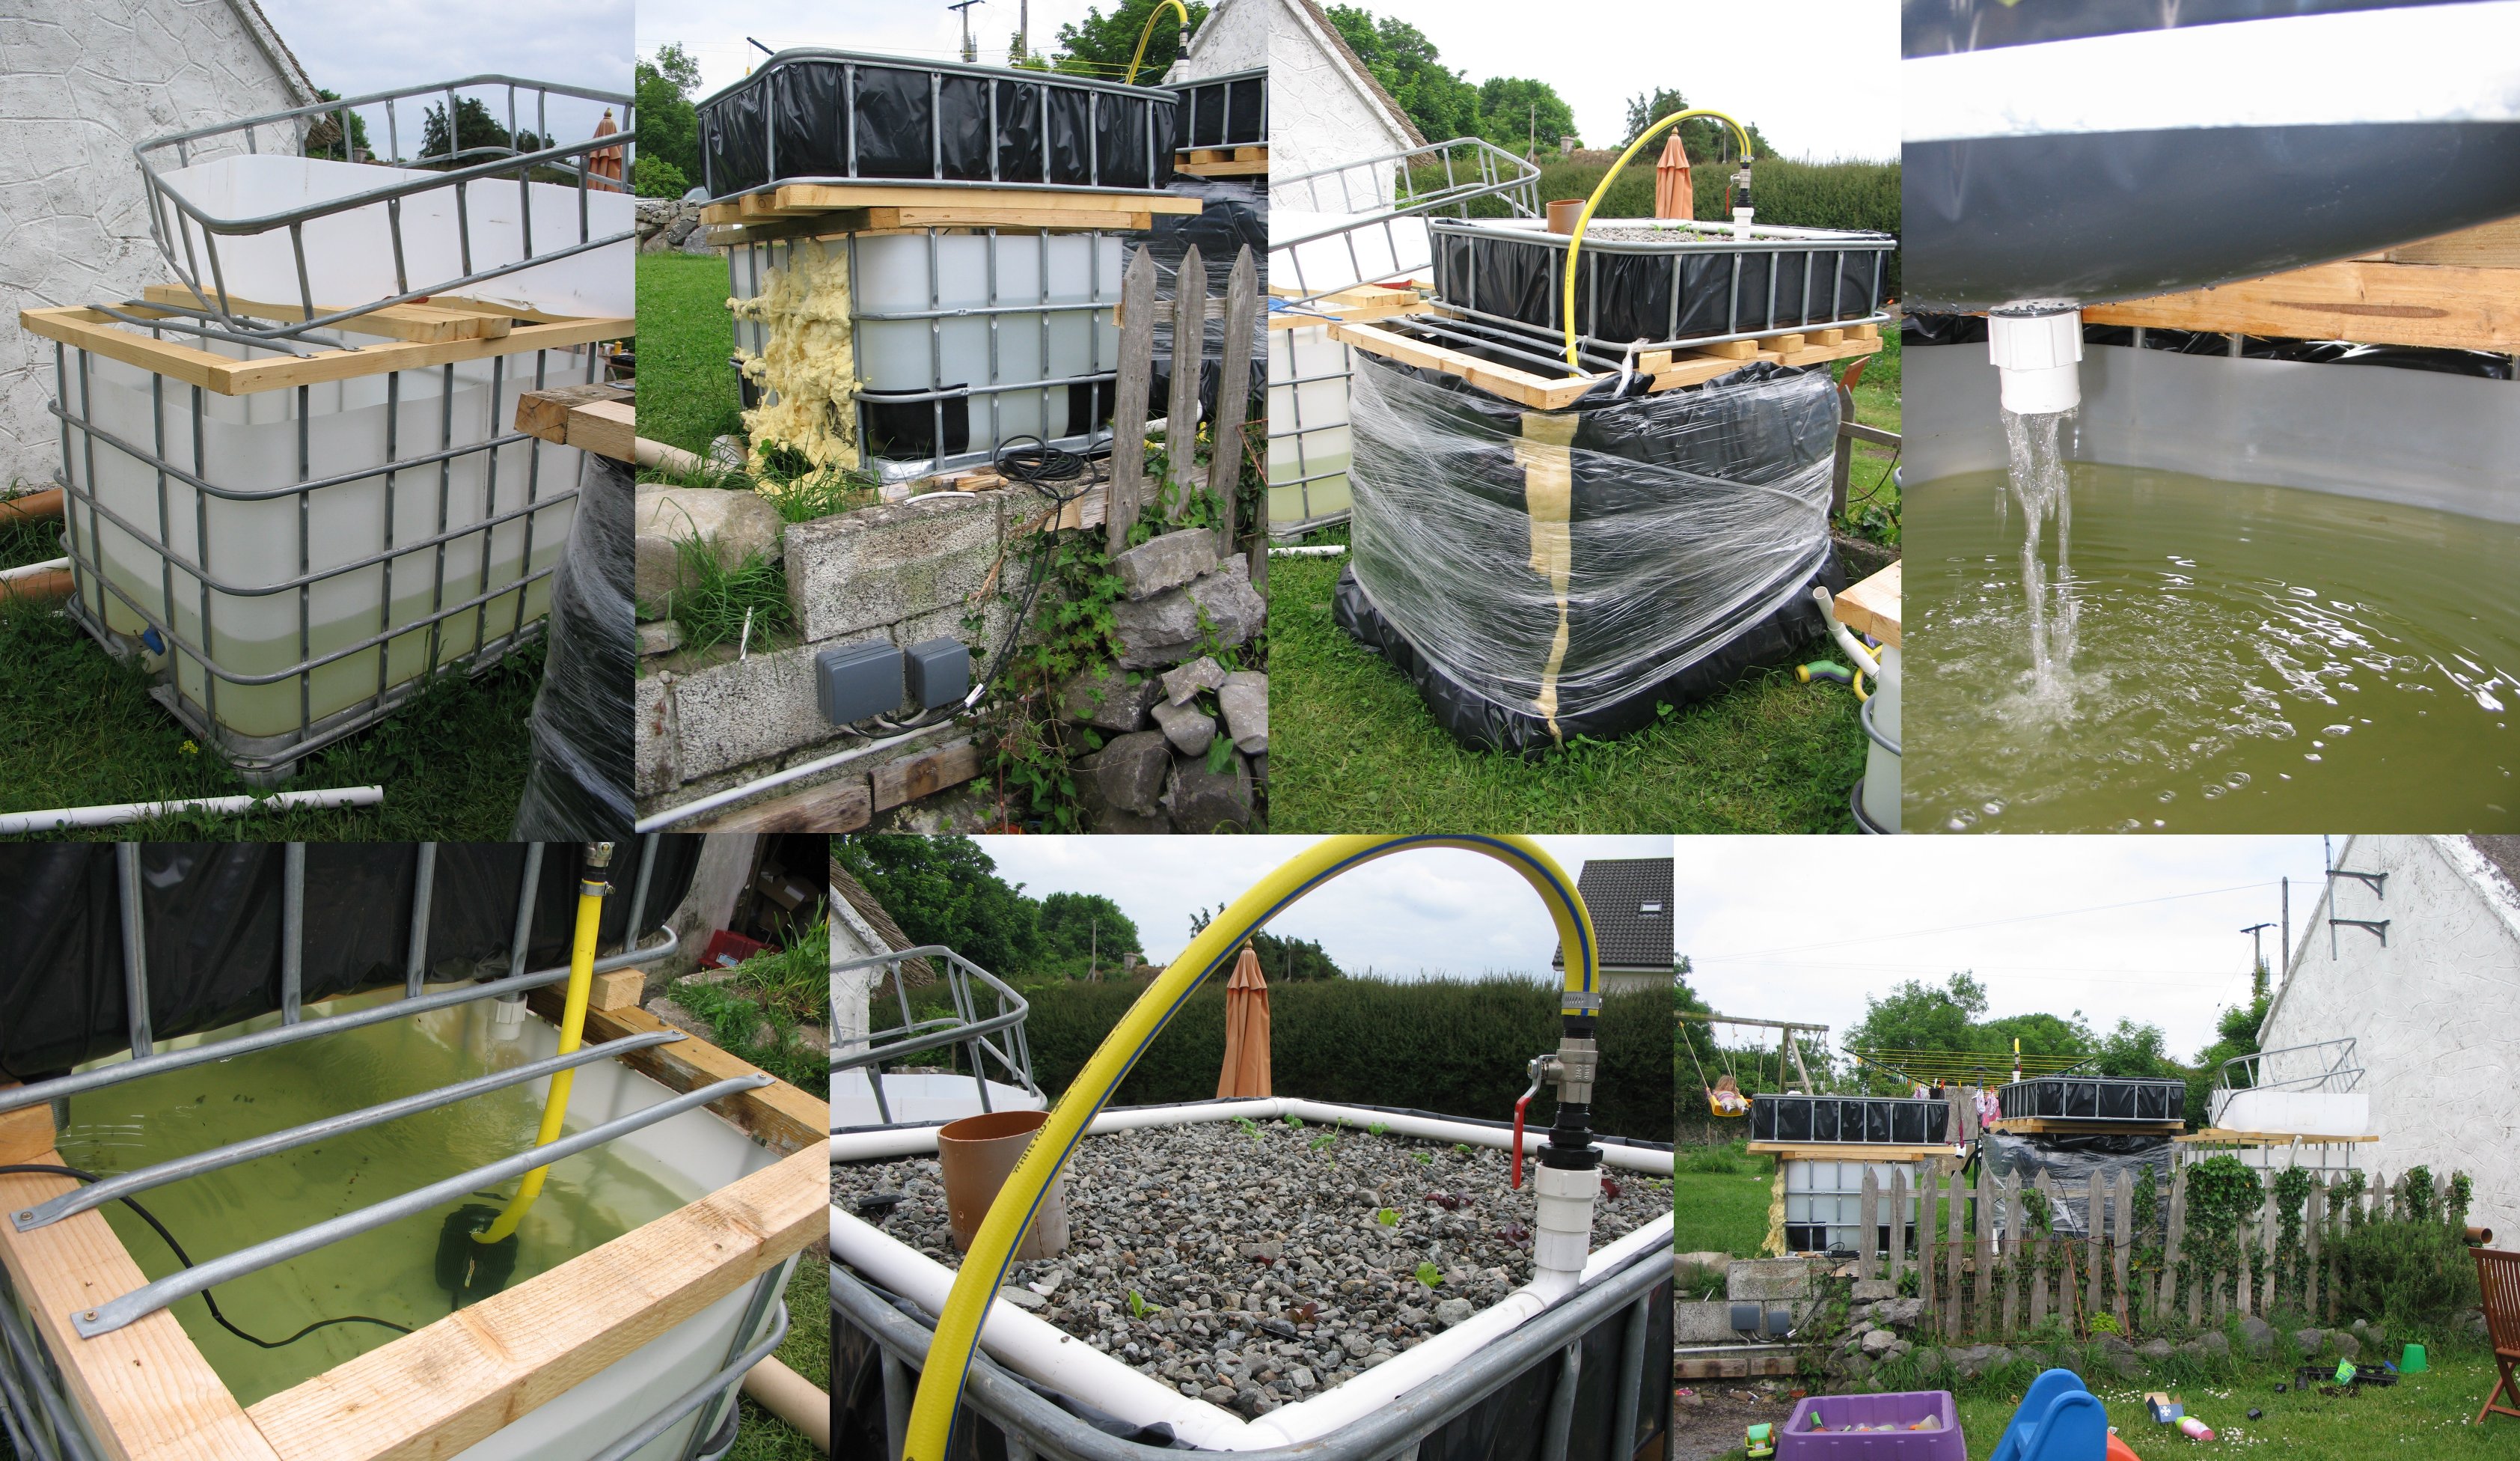 ... our new side project – our Headford backyard aquaponics system